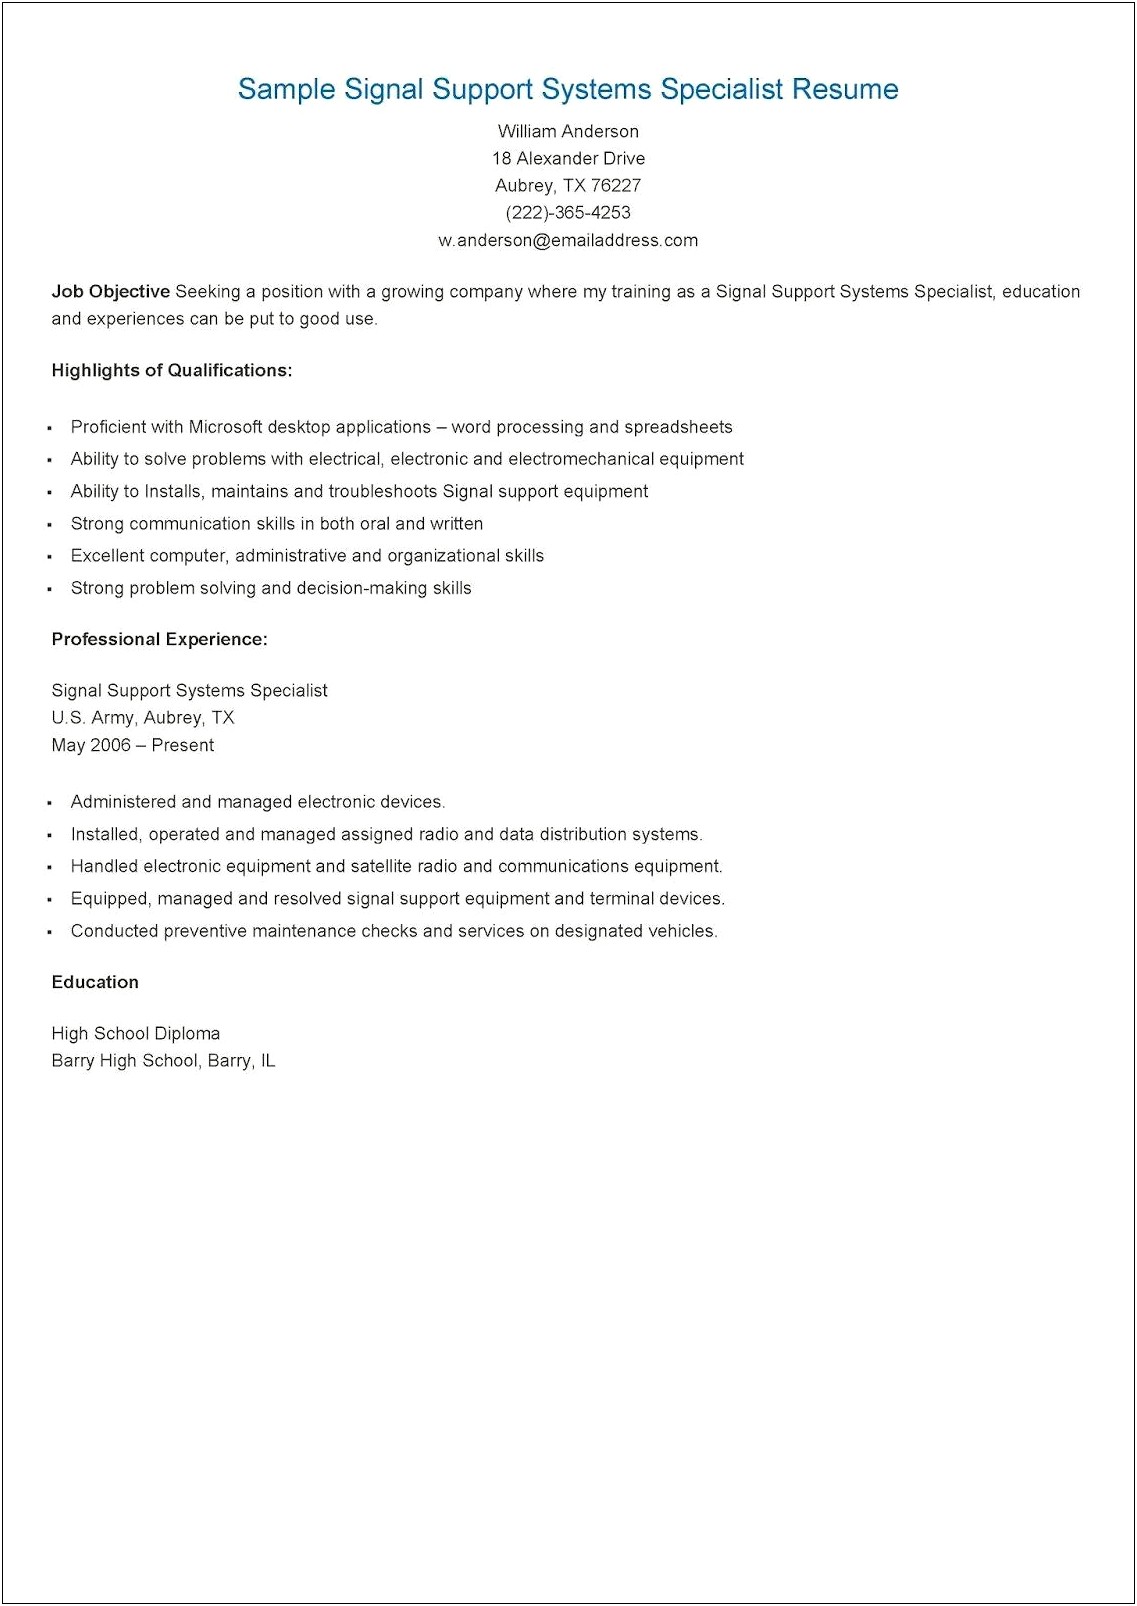 Resume Example For Signal Systems Support Specailist